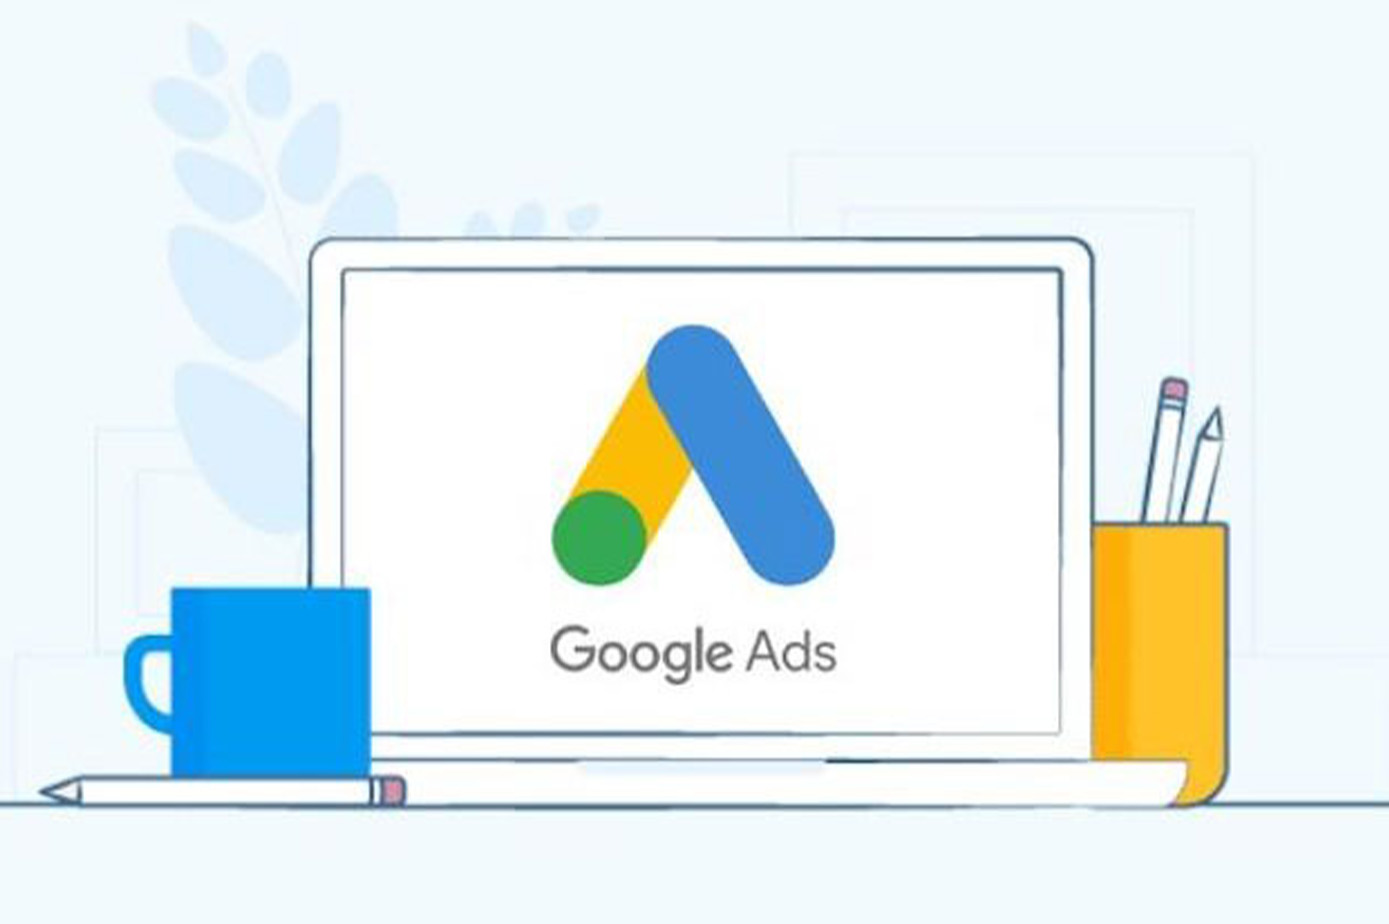 Animated image of a computer that has the Google Ads logo on its desktop